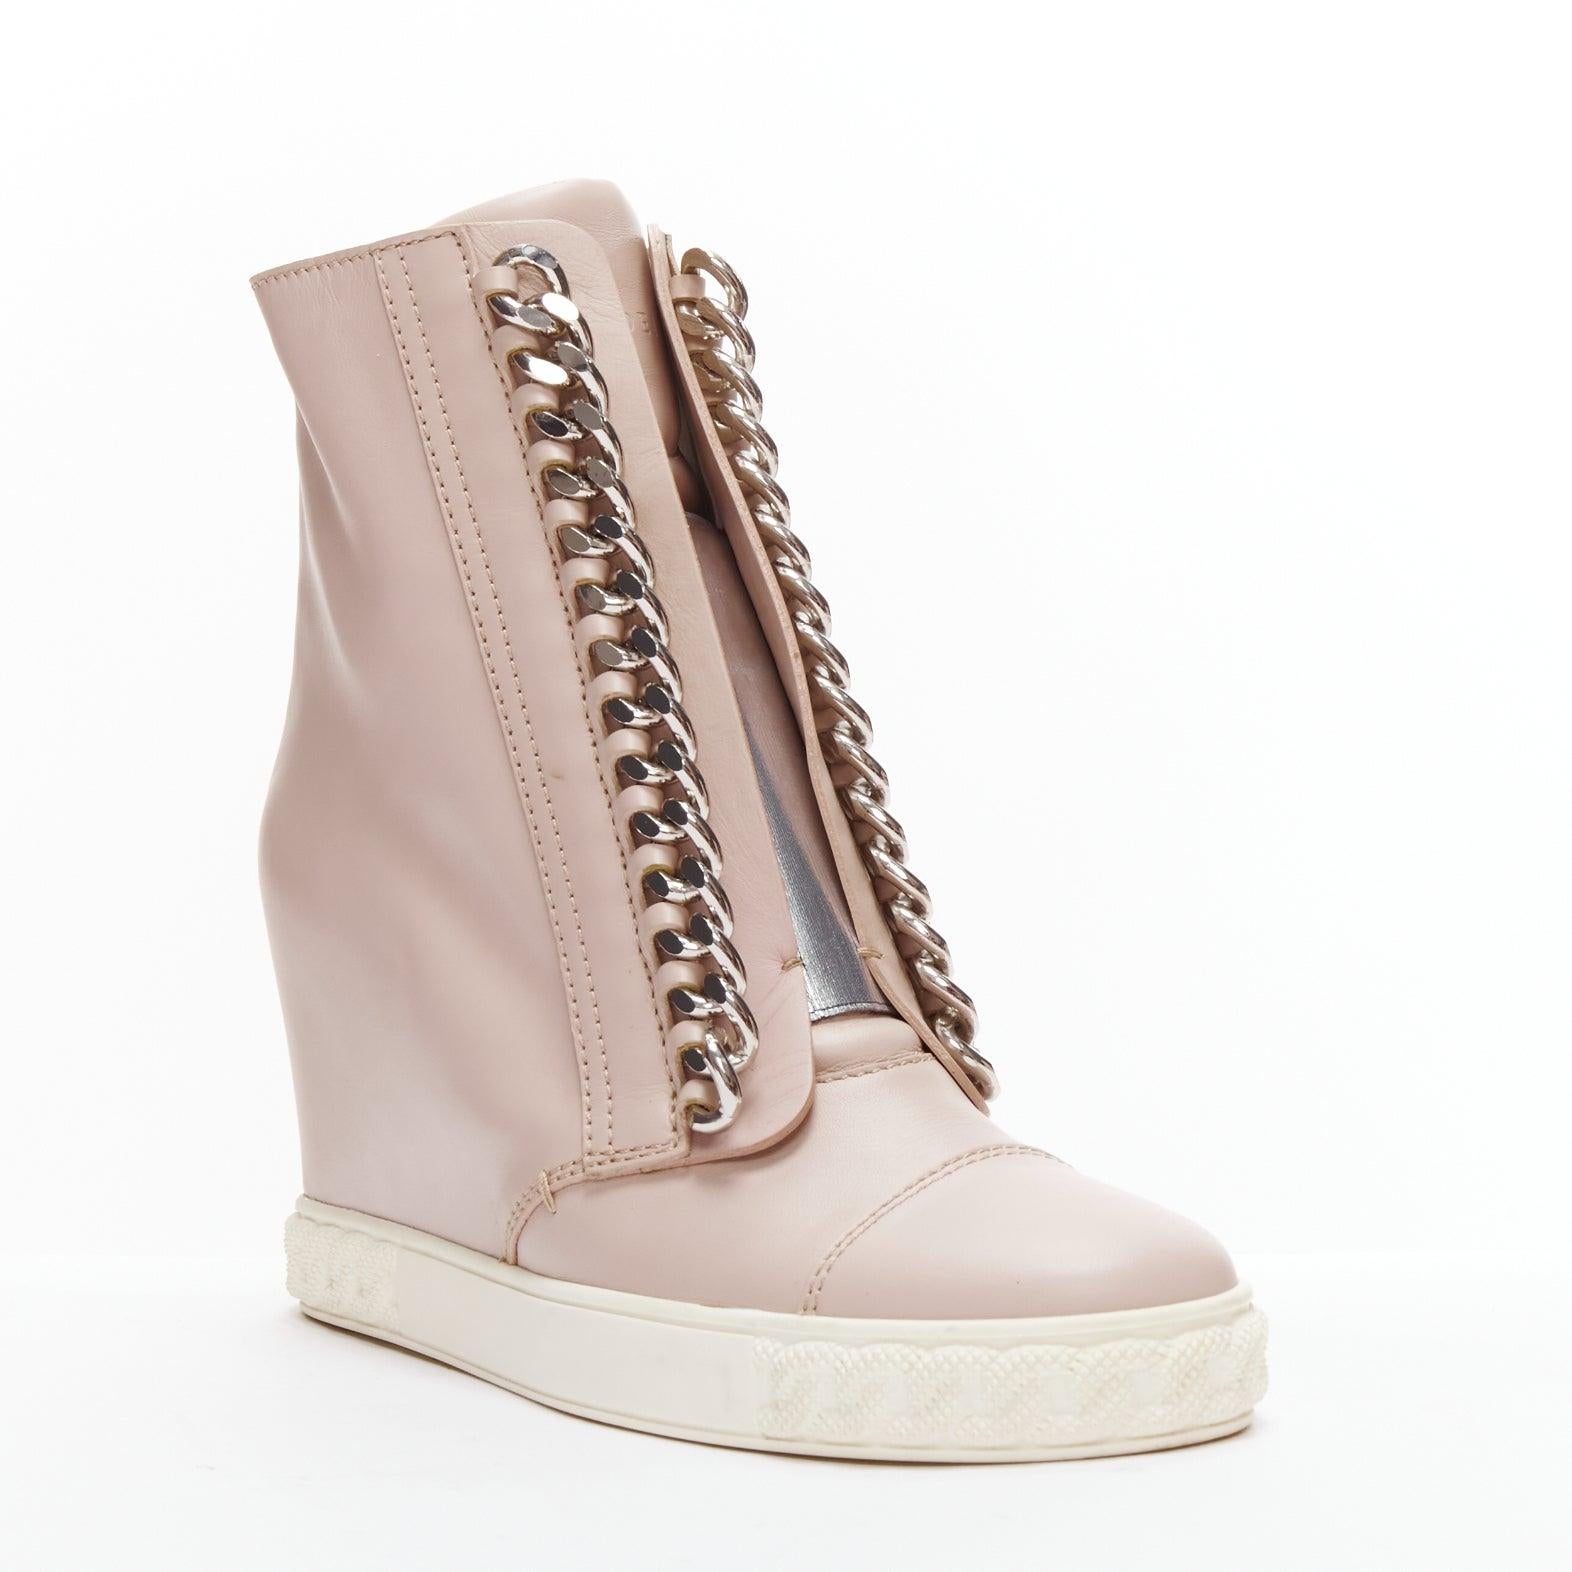 CASADEI pink leather silver chain trim ankle wedge sneakers EU39.5
Reference: AAWC/A00557
Brand: Casadei
Material: Leather, Metal
Color: Pink, Silver
Pattern: Solid
Closure: Zip
Lining: White Leather
Extra Details: Back zip.
Made in: